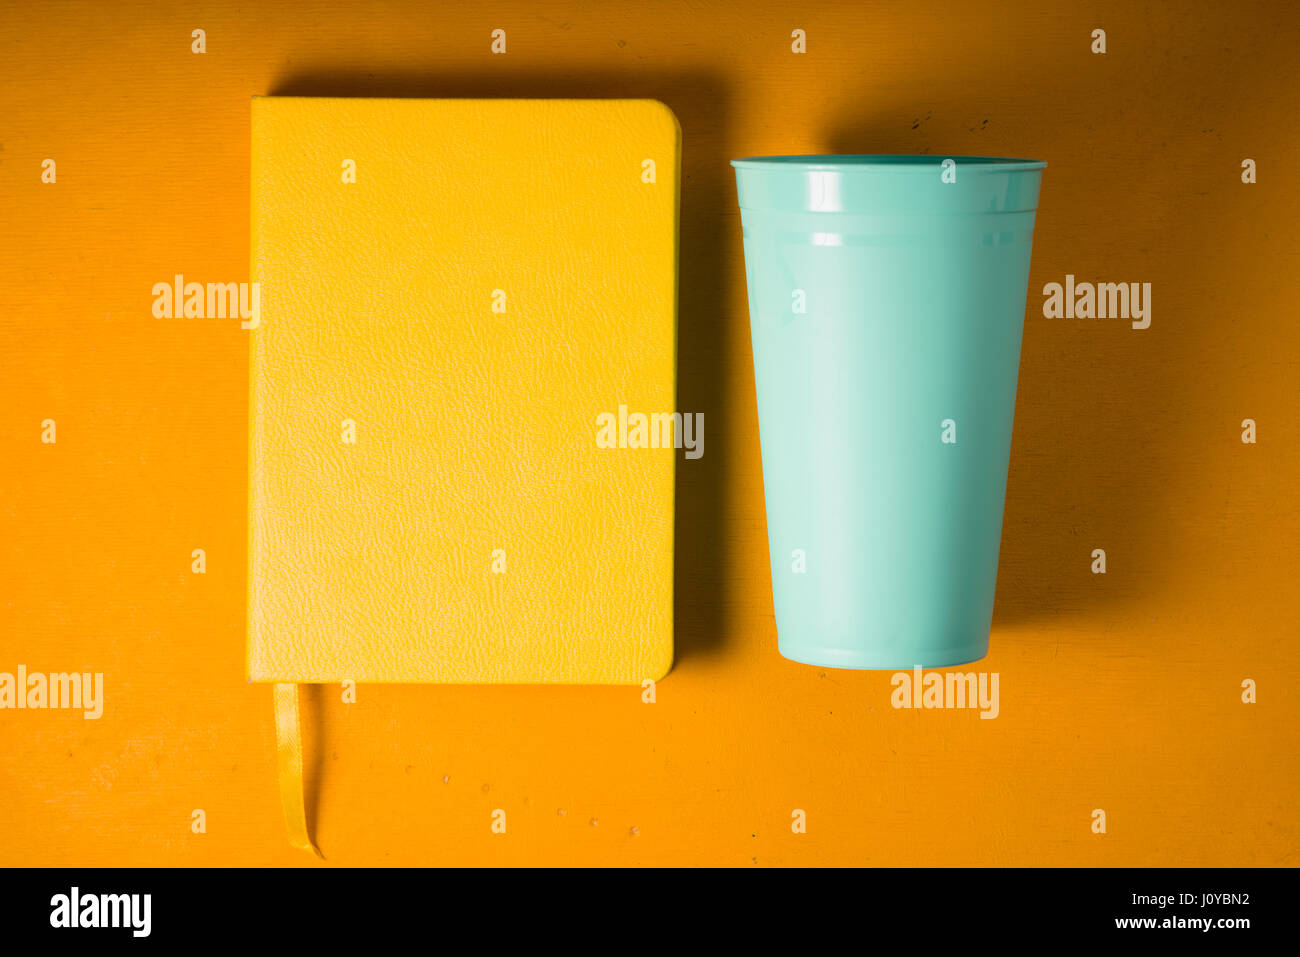 Notepad and plastic turquoise glass on a yellow background Stock Photo